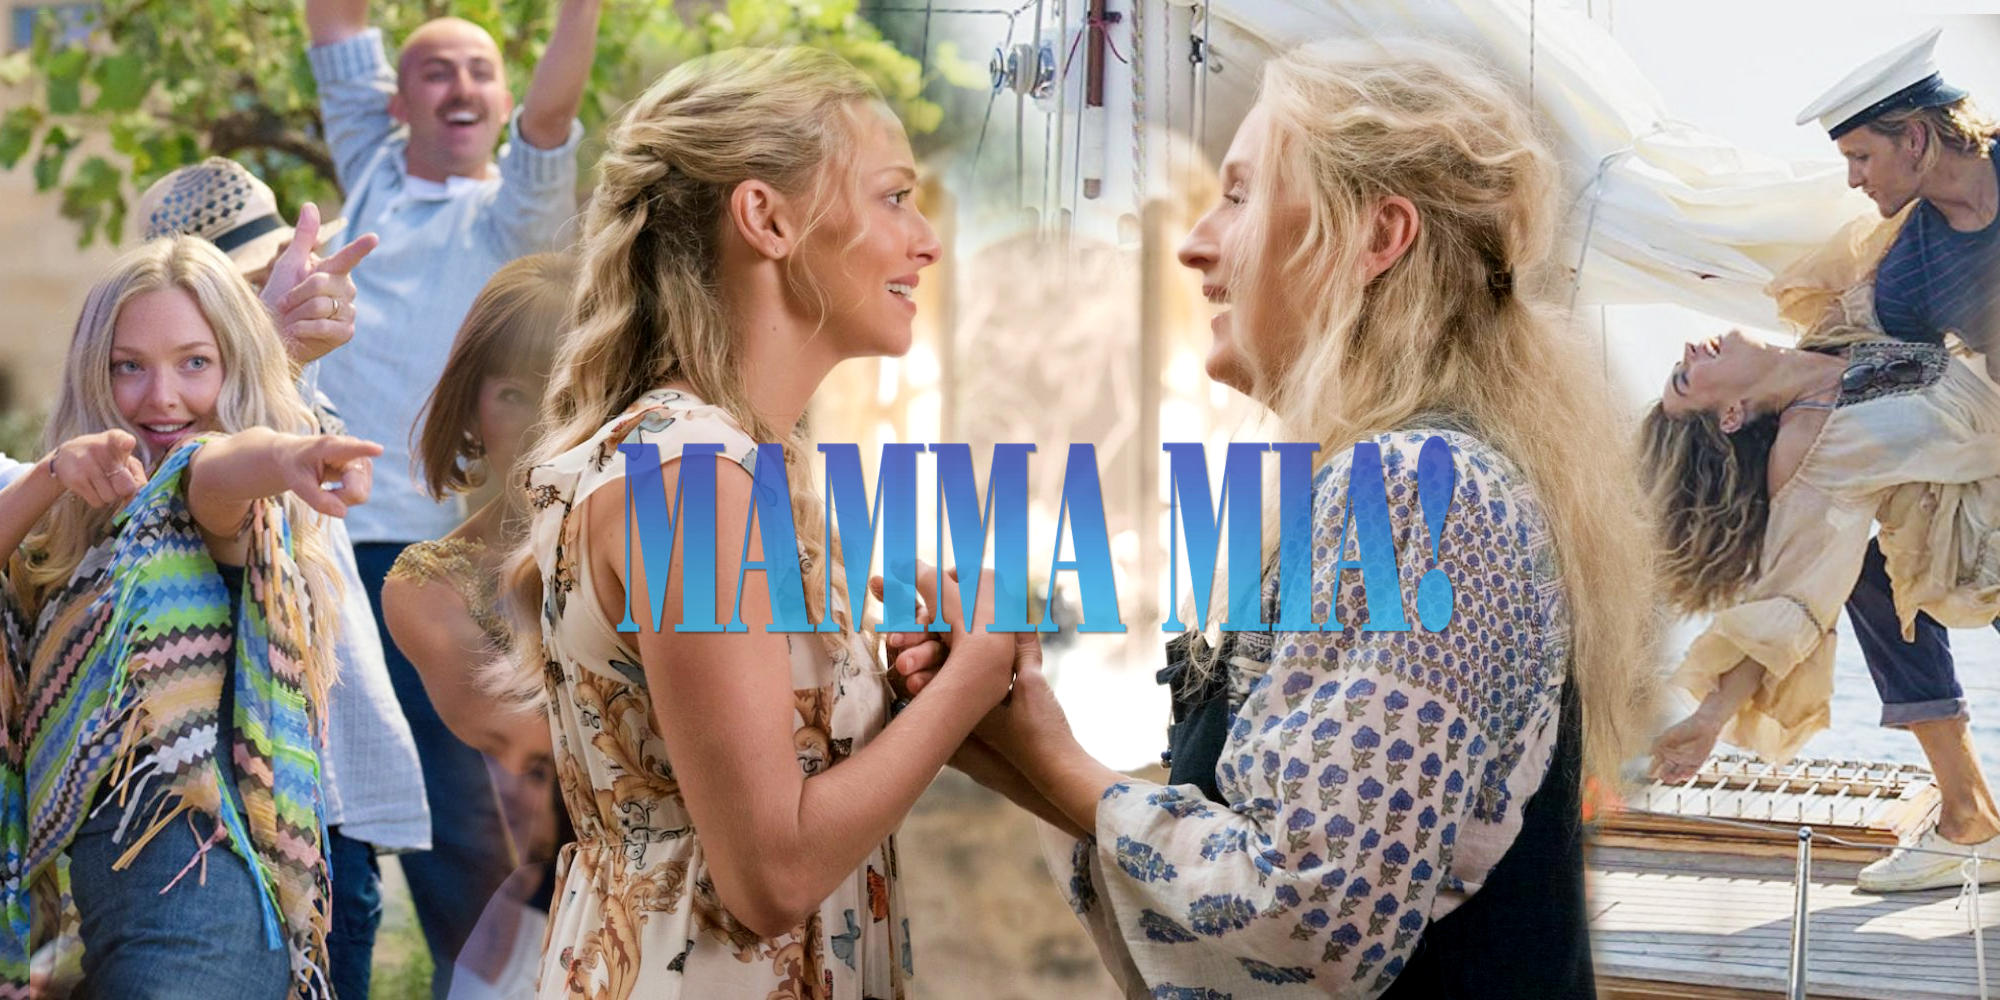 10 Best Show-Stopping Musical Numbers in the 'Mamma Mia' Movies